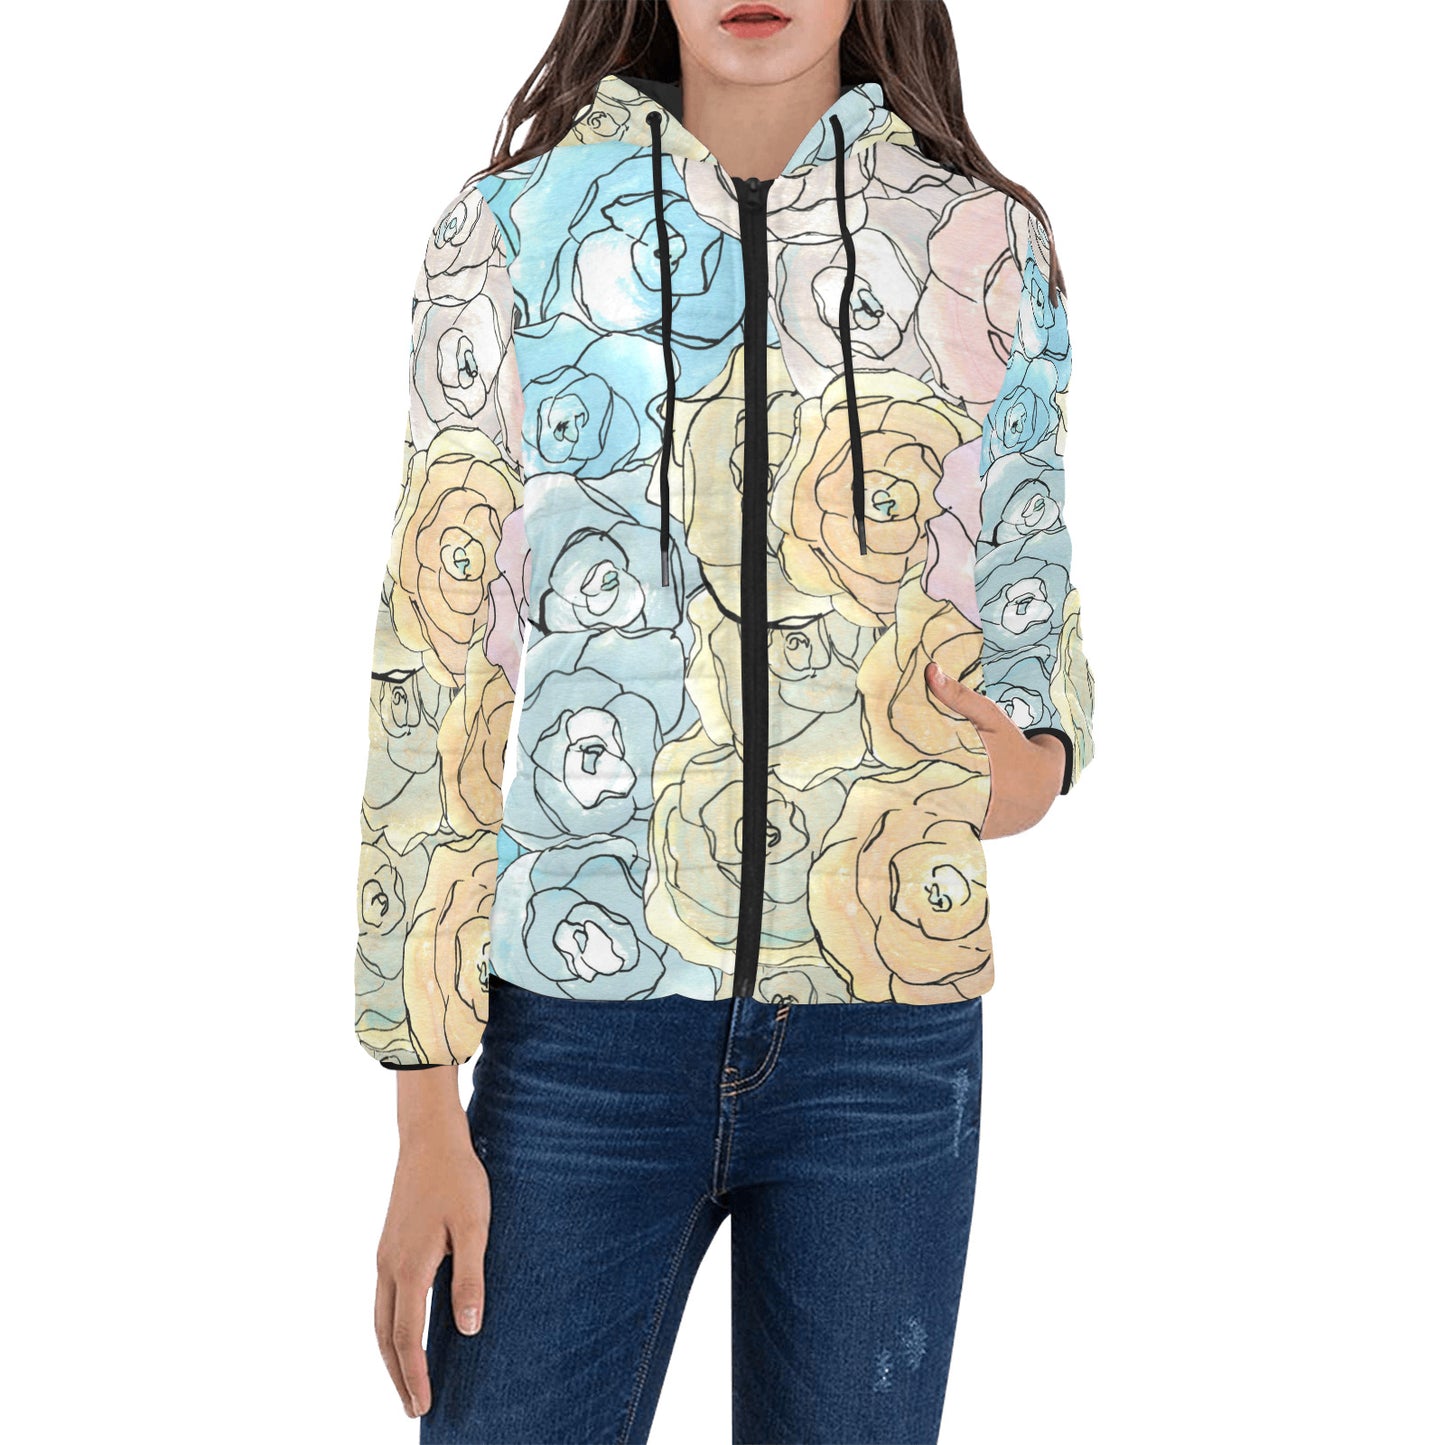 In a Cloud of Roses - Women's Padded Hooded Jacket